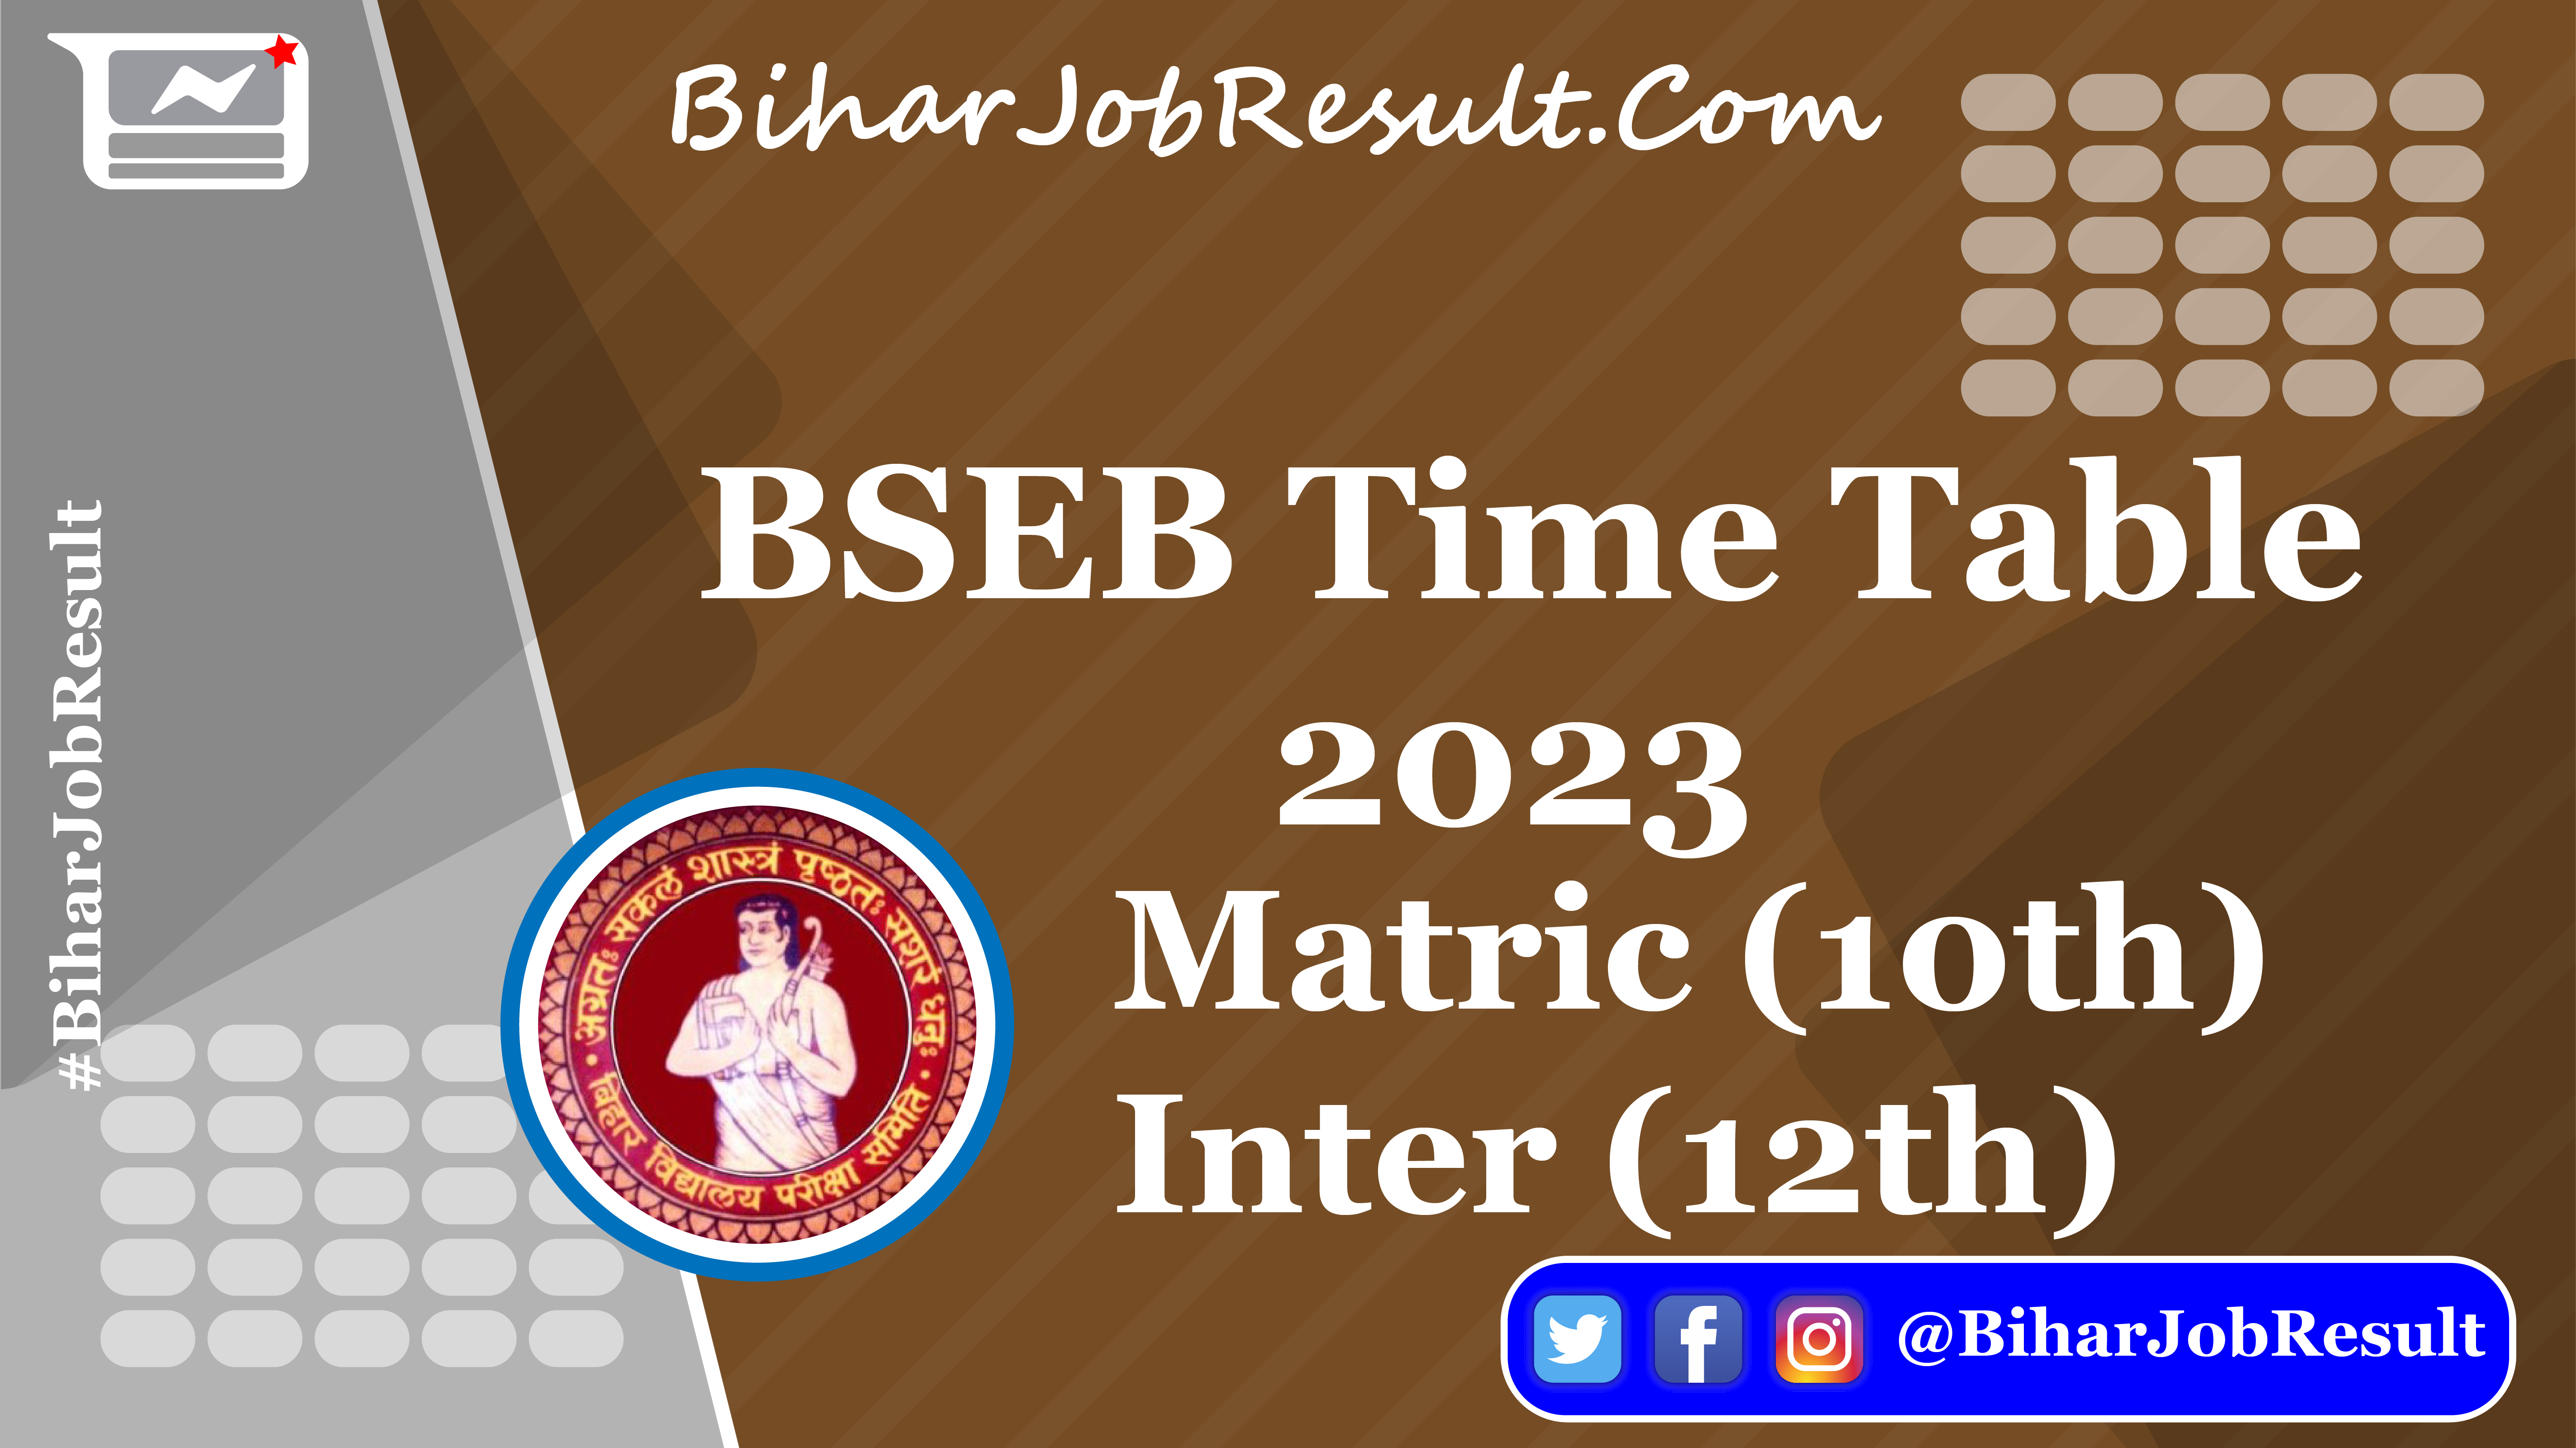 BSEB Time Table 2023 | BSEB 10th & 12th Time Table | Bihar Board Matric & Inter Annual Exam Time Table 2023